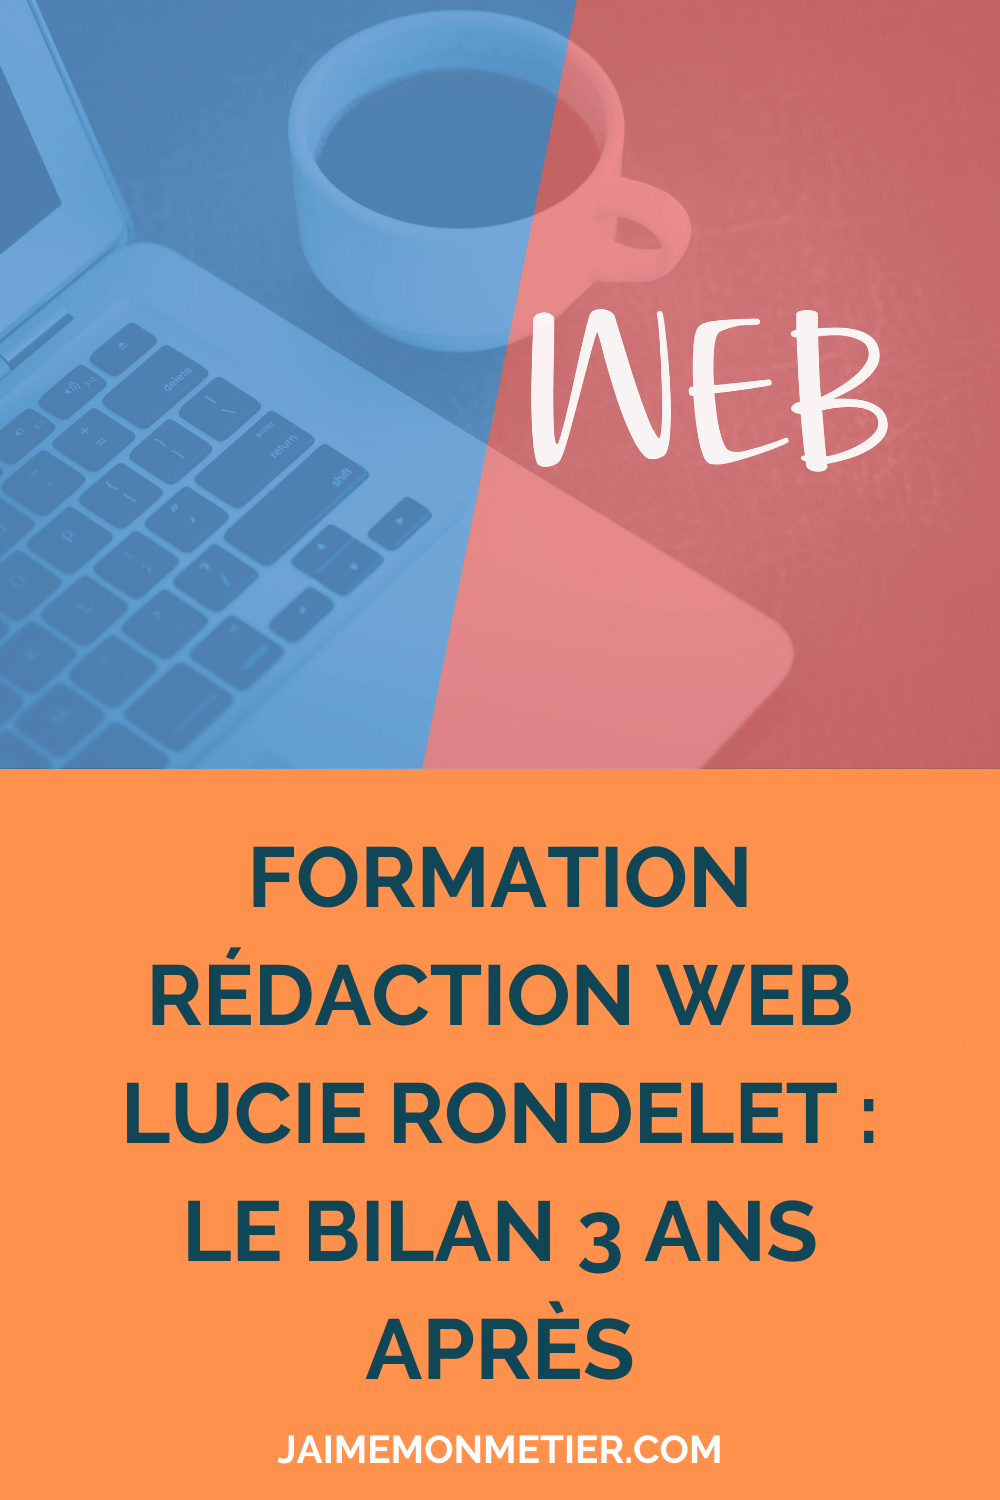 formation redaction web lucie rondelet